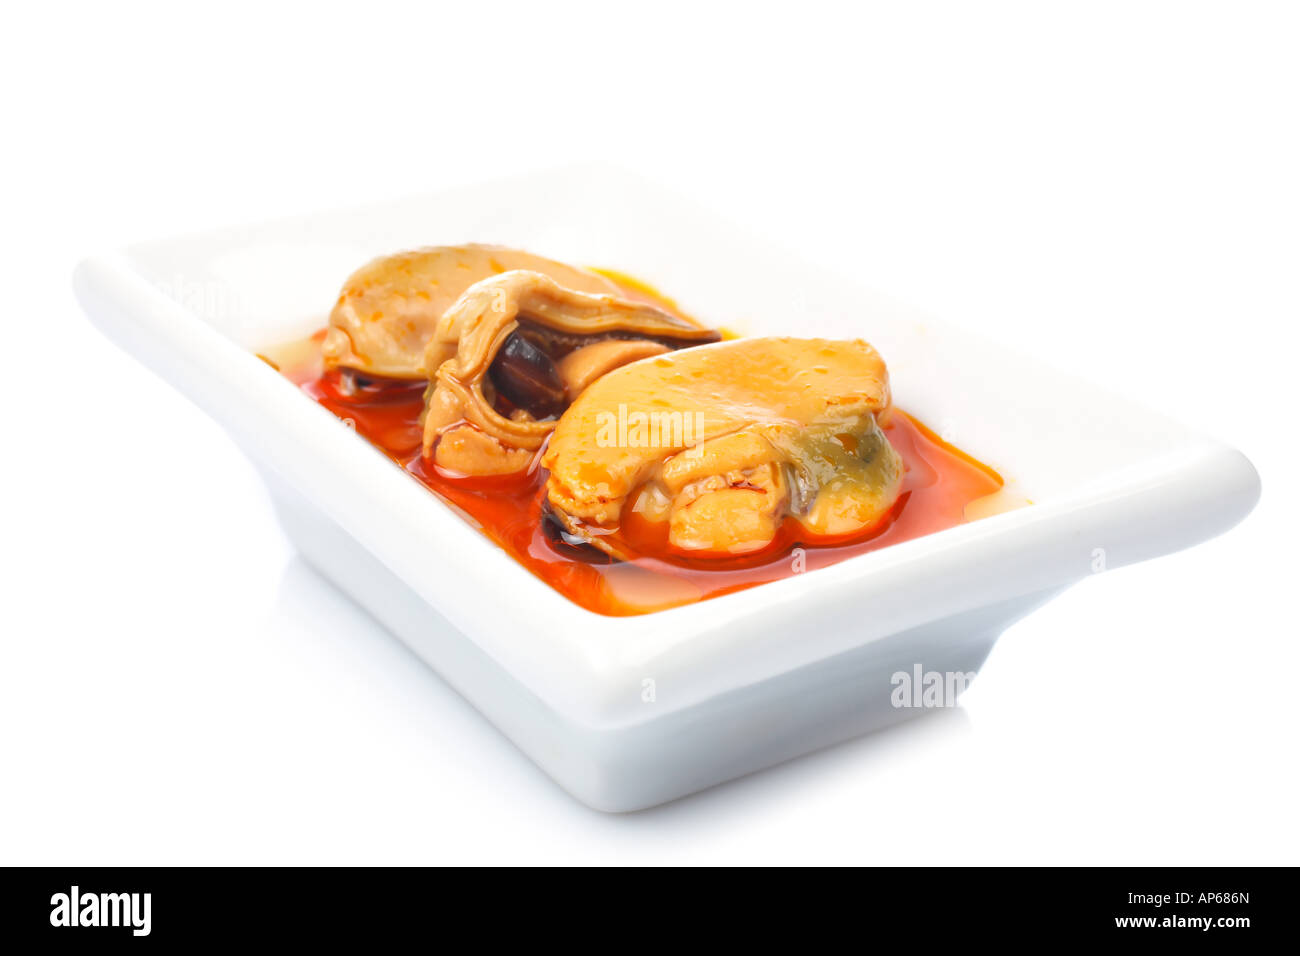 Some mussels just cooked in a white dish for a good meal reflectd on white background Shallow DOF Stock Photo